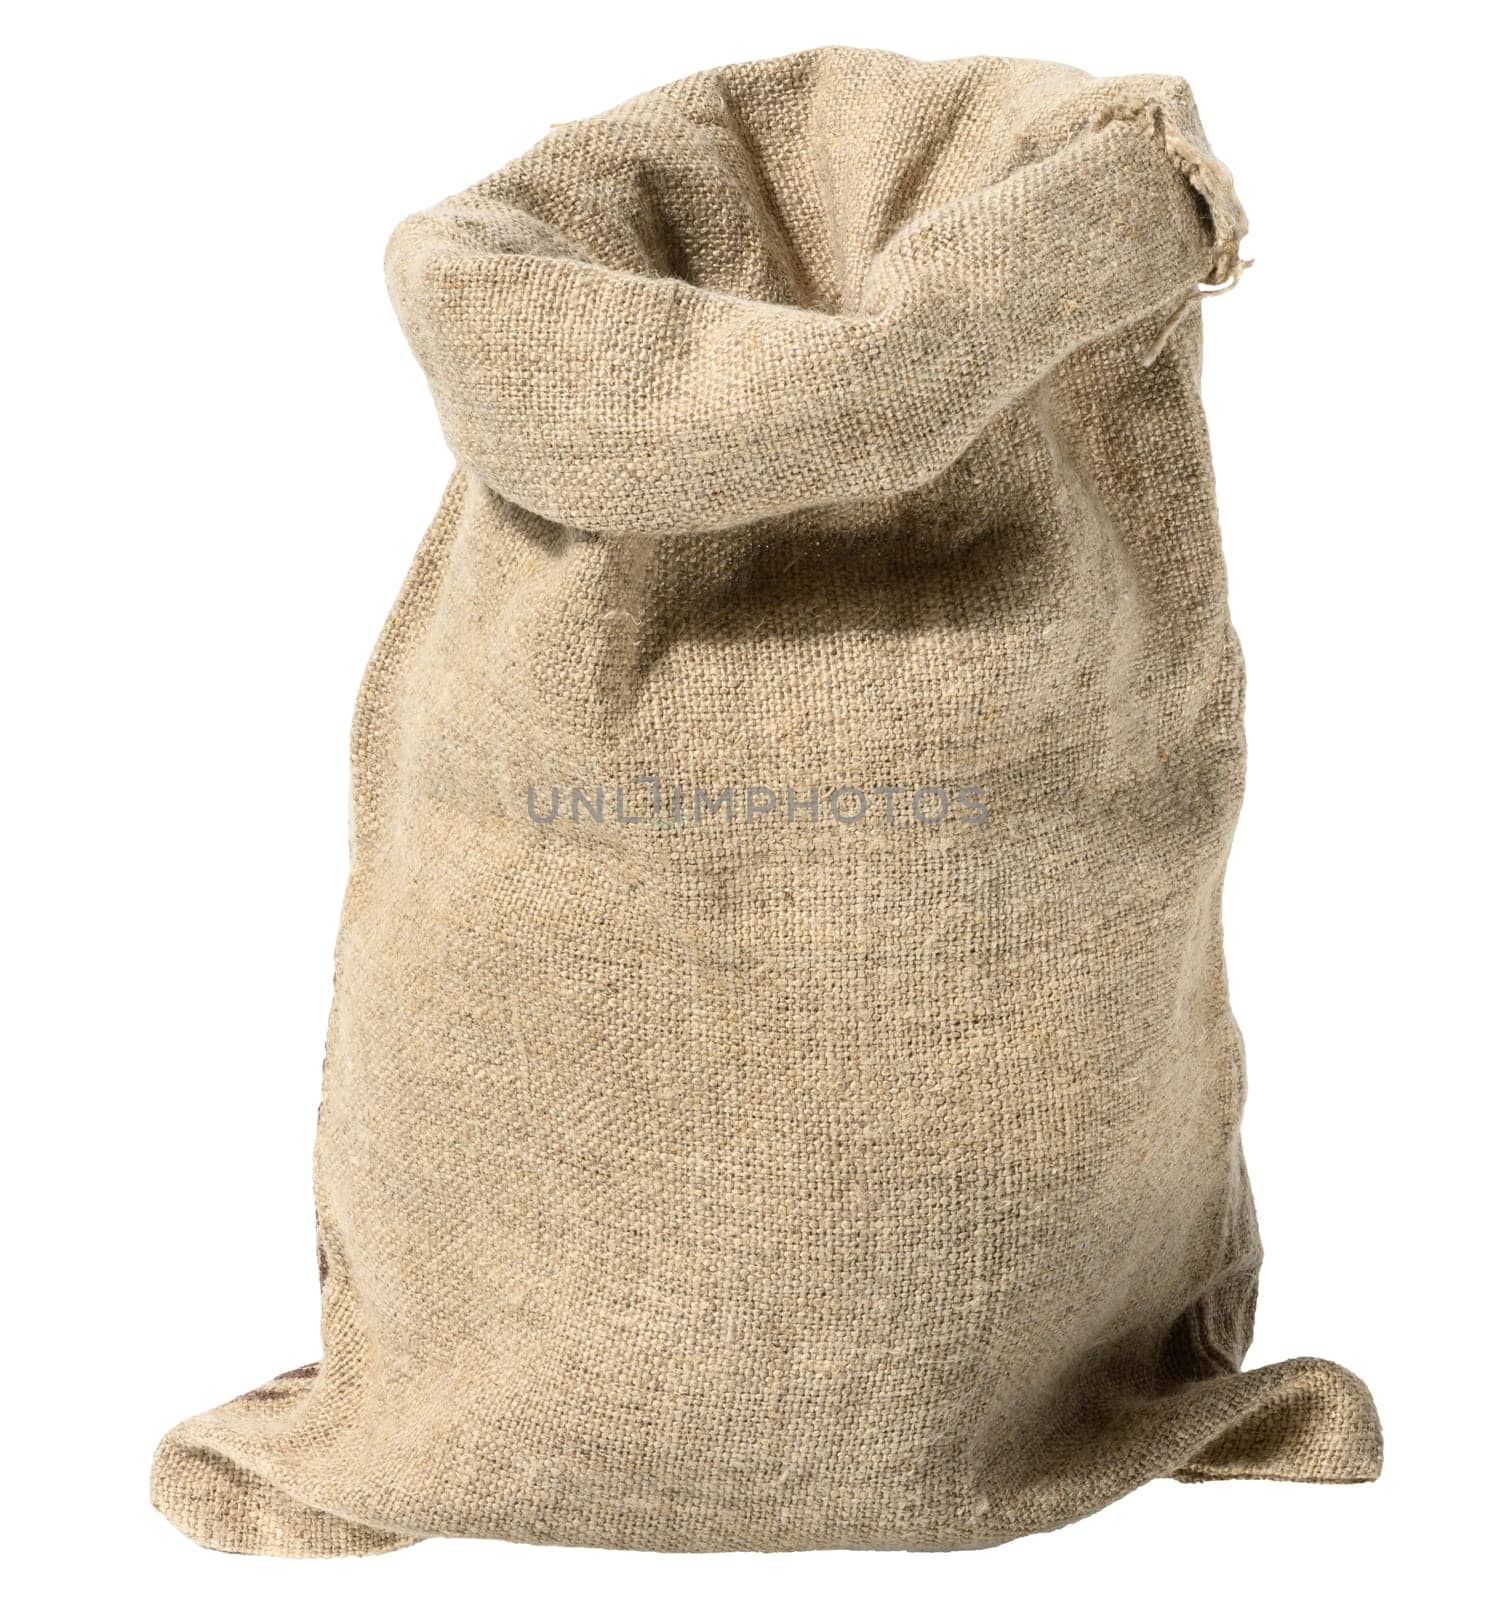 Open full canvas bag on white isolated background